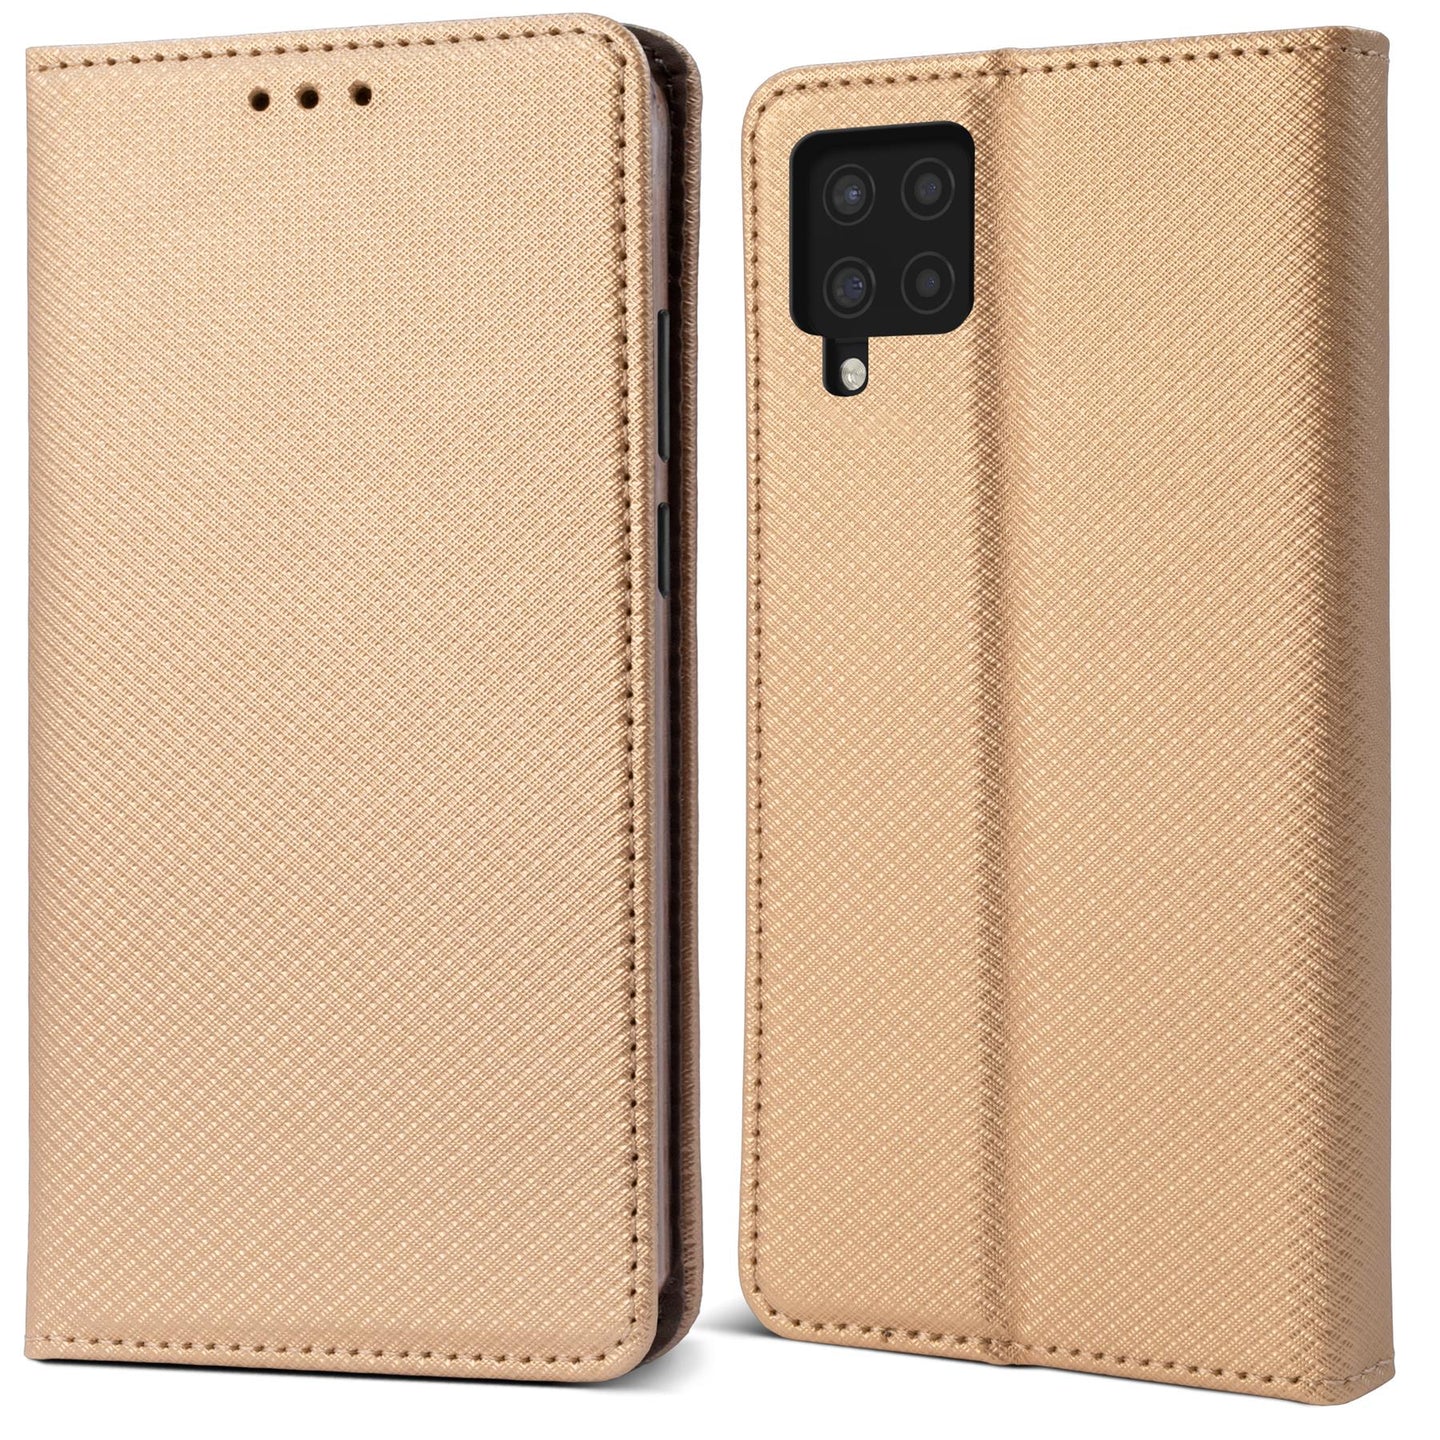 Moozy Case Flip Cover for Samsung A22 4G, Gold - Smart Magnetic Flip Case Flip Folio Wallet Case with Card Holder and Stand, Credit Card Slots, Kickstand Function